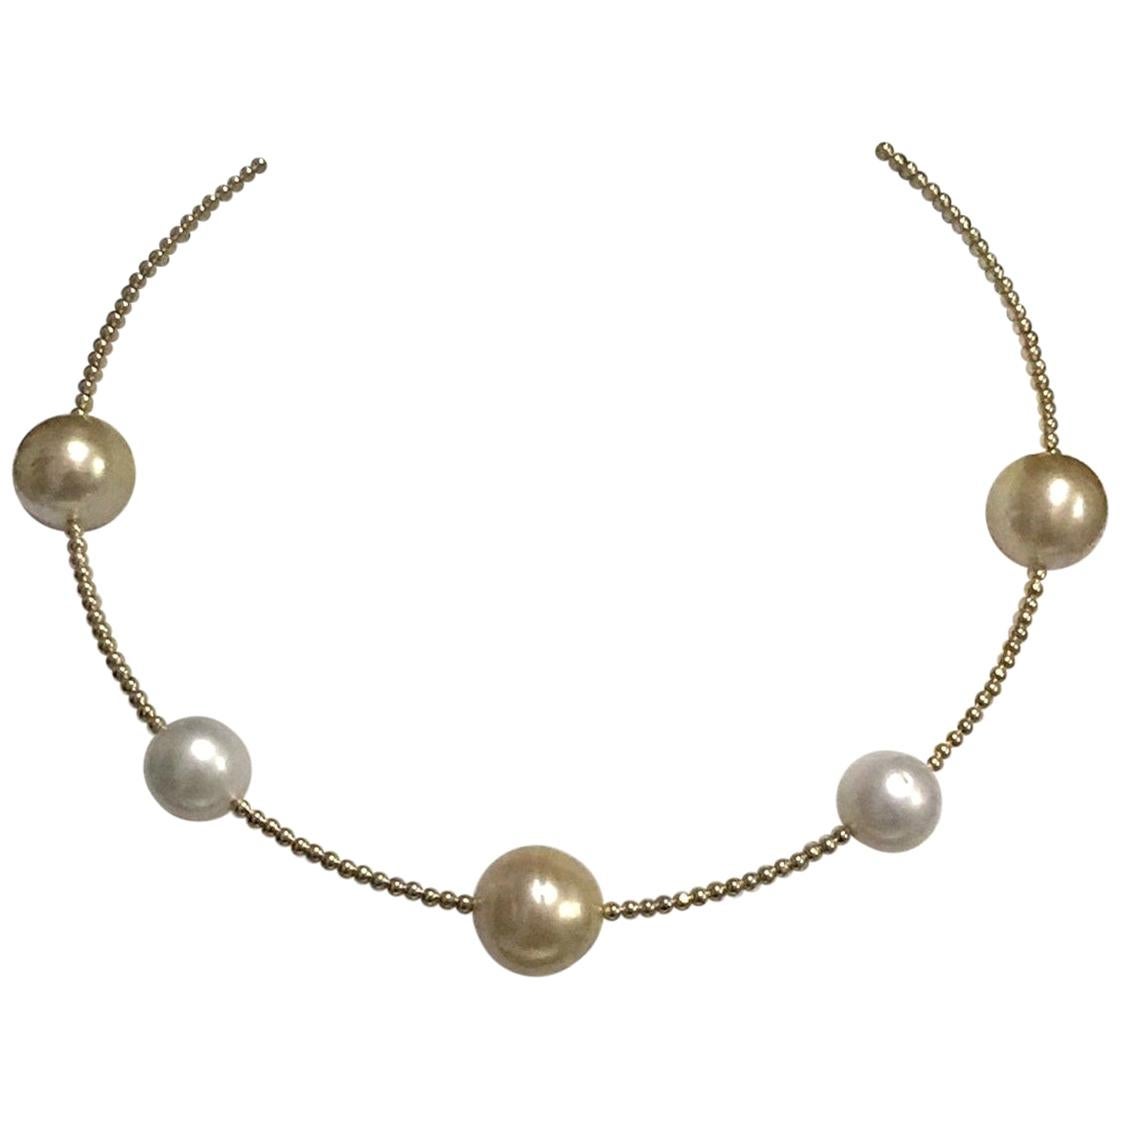 Golden South Sea Pearl Necklace 14k Gold Italy Italy Certified